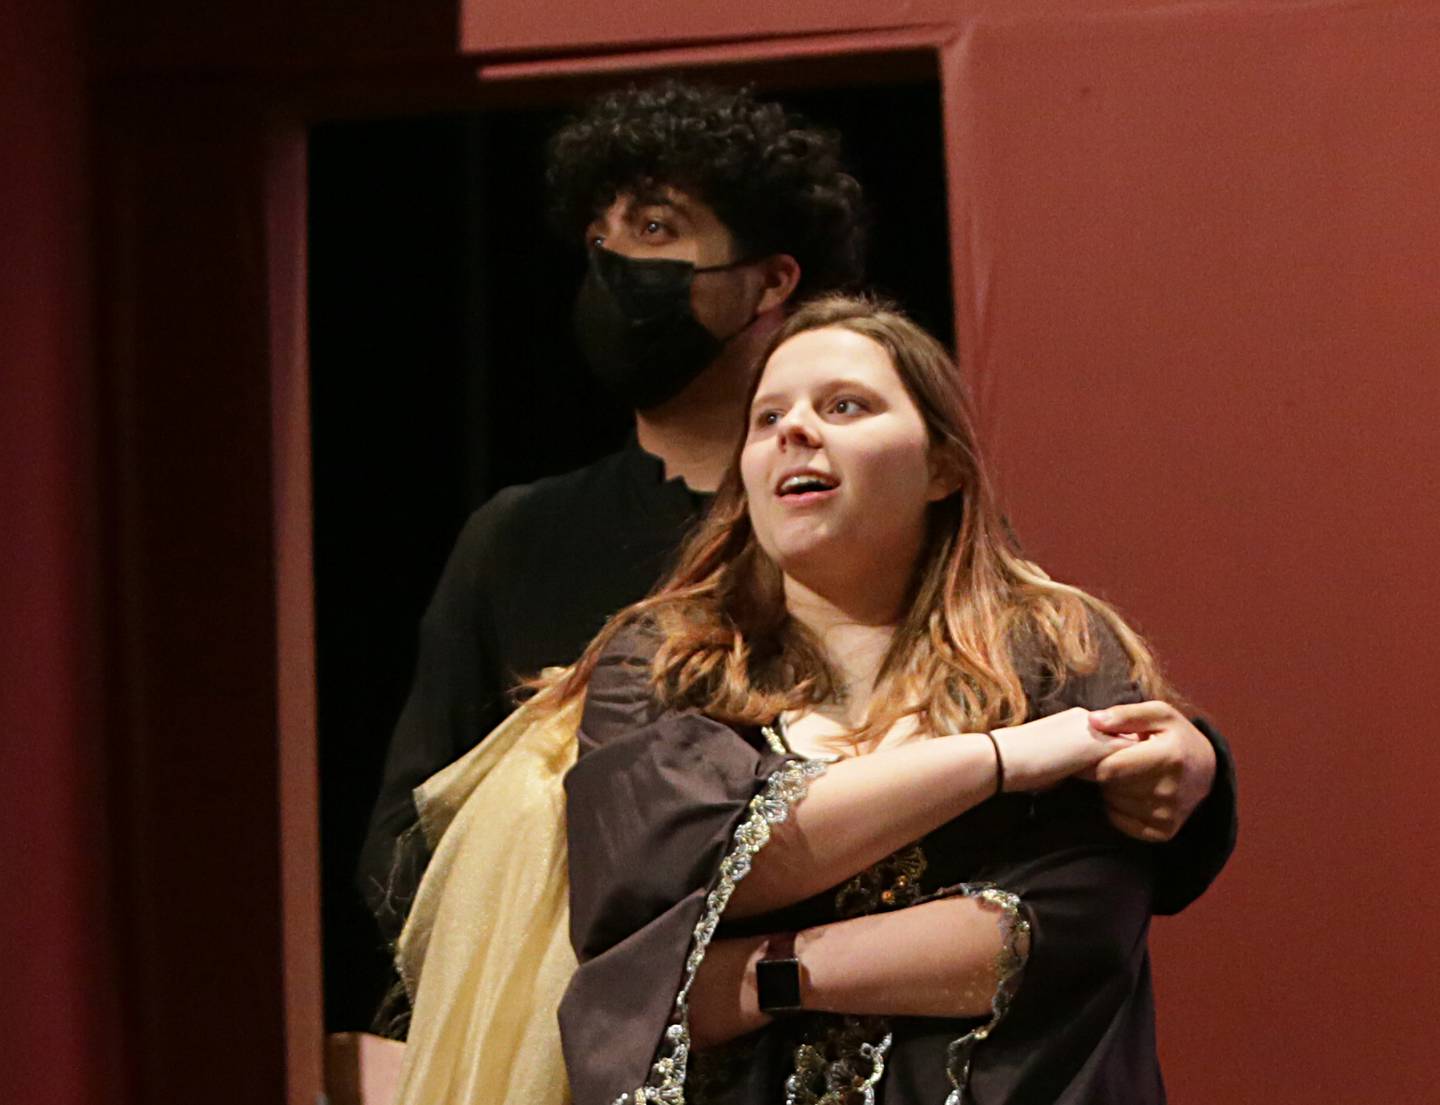 Eulysses Preciado and Karli Miars act out a scene during a rehearsal of Cinderella at Mendota High School auditorium on Thursday, March 18, 2022 in Mendota.